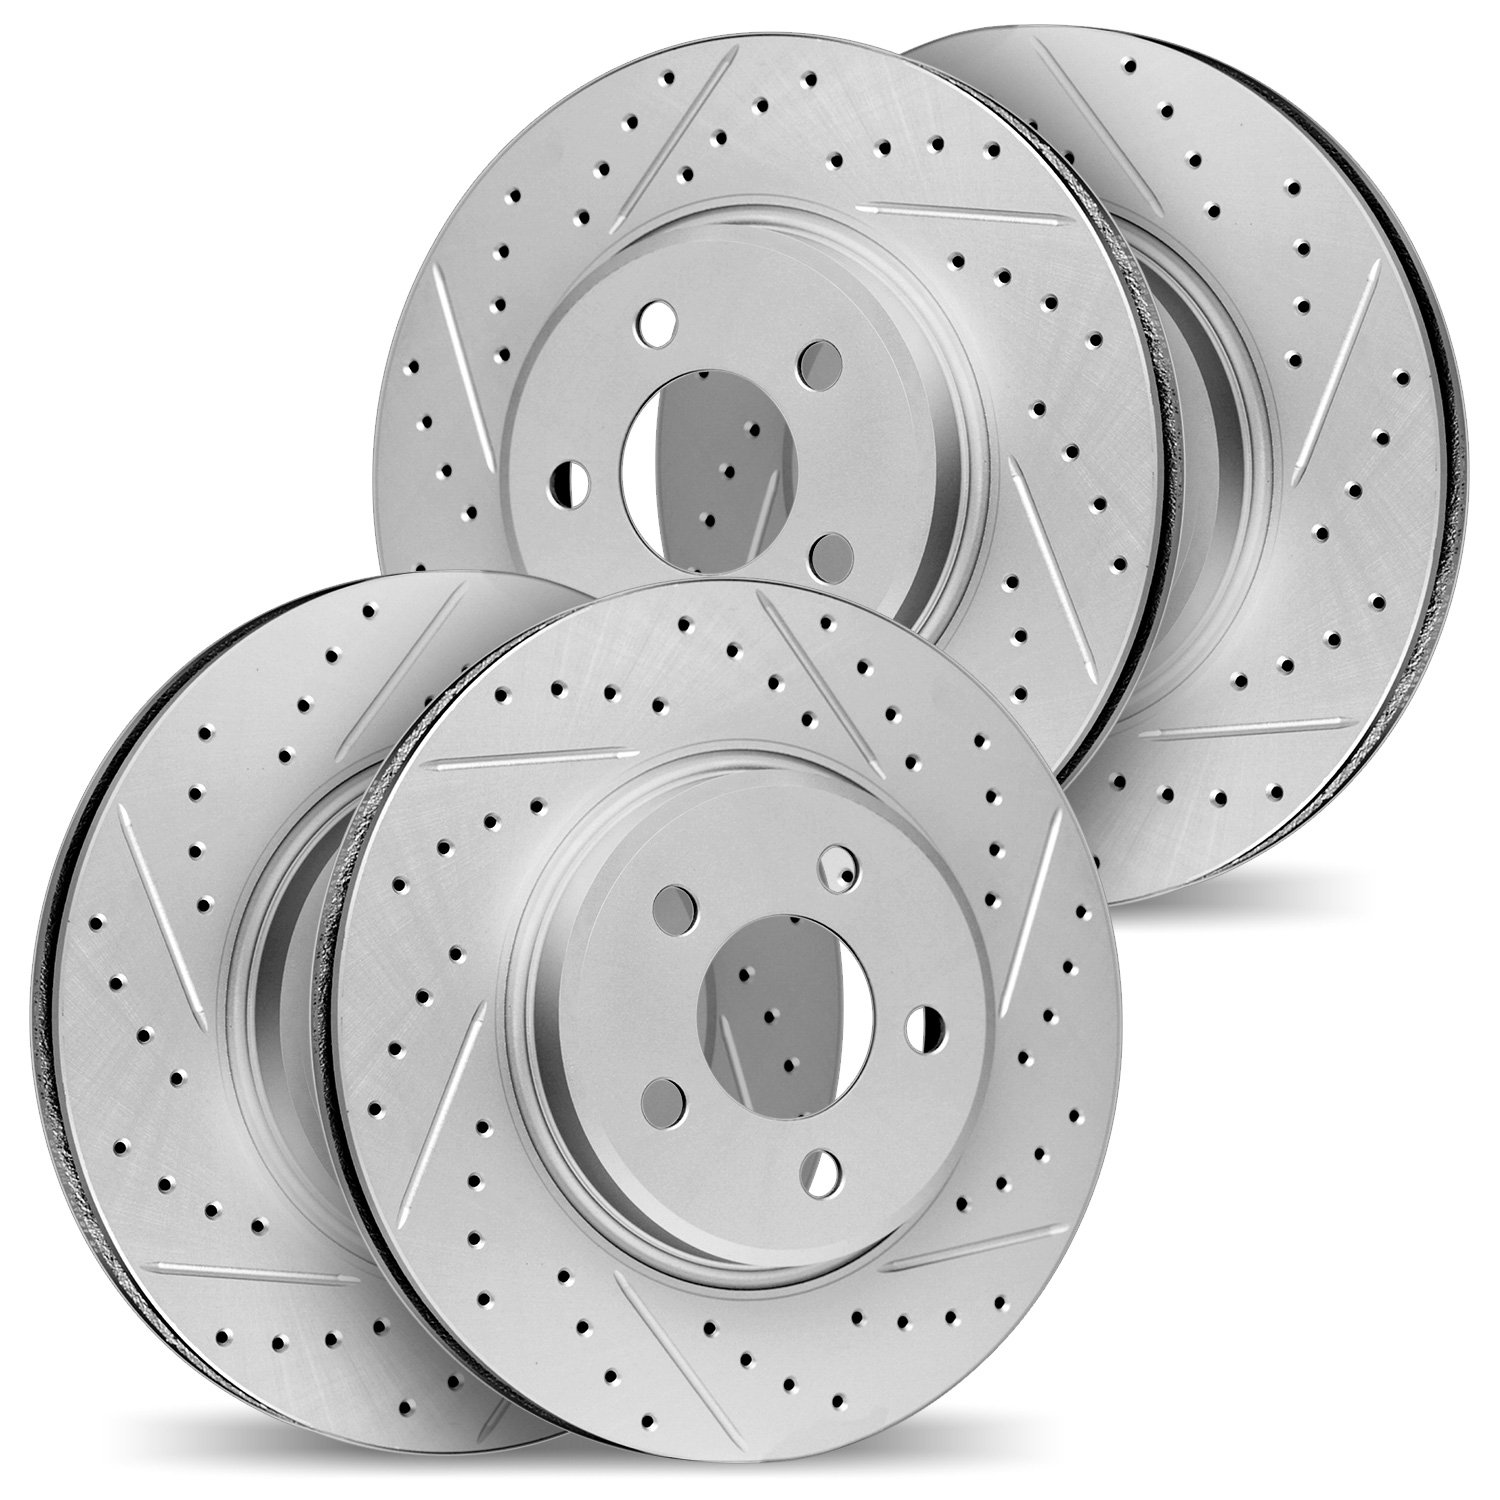 2004-31040 Geoperformance Drilled/Slotted Brake Rotors, Fits Select BMW, Position: Front and Rear